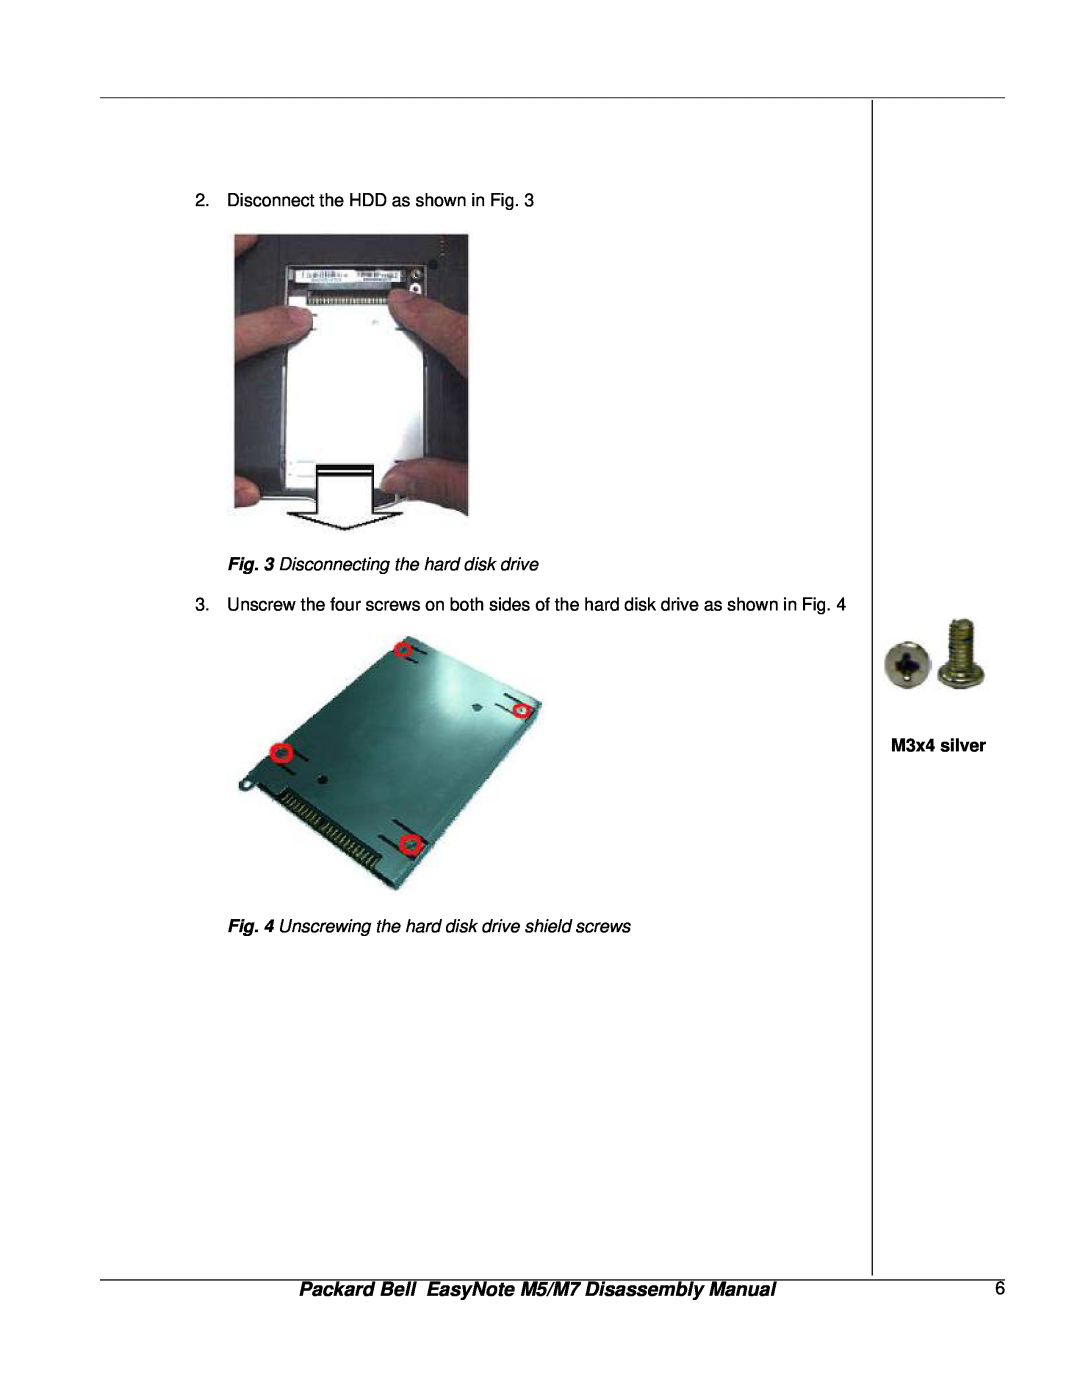 NEC manual Disconnecting the hard disk drive, M3x4 silver, Packard Bell EasyNote M5/M7 Disassembly Manual 